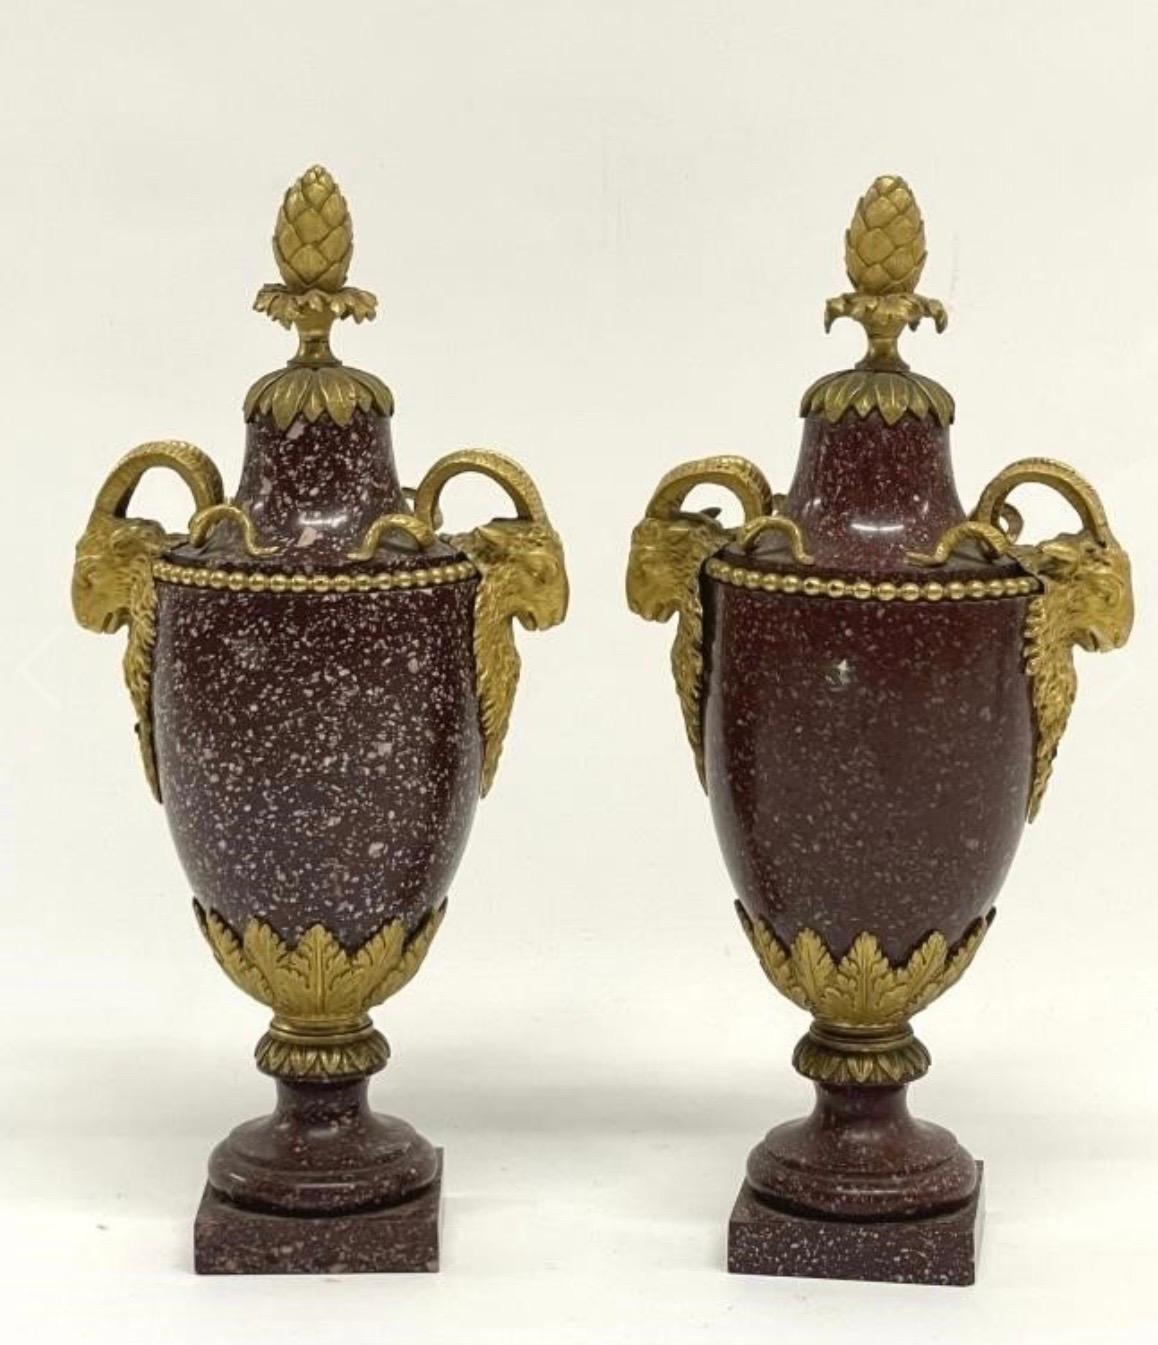 The mounts are similar to those by Gouthière. The one vase having more speckling of white in the porphyry than the other.